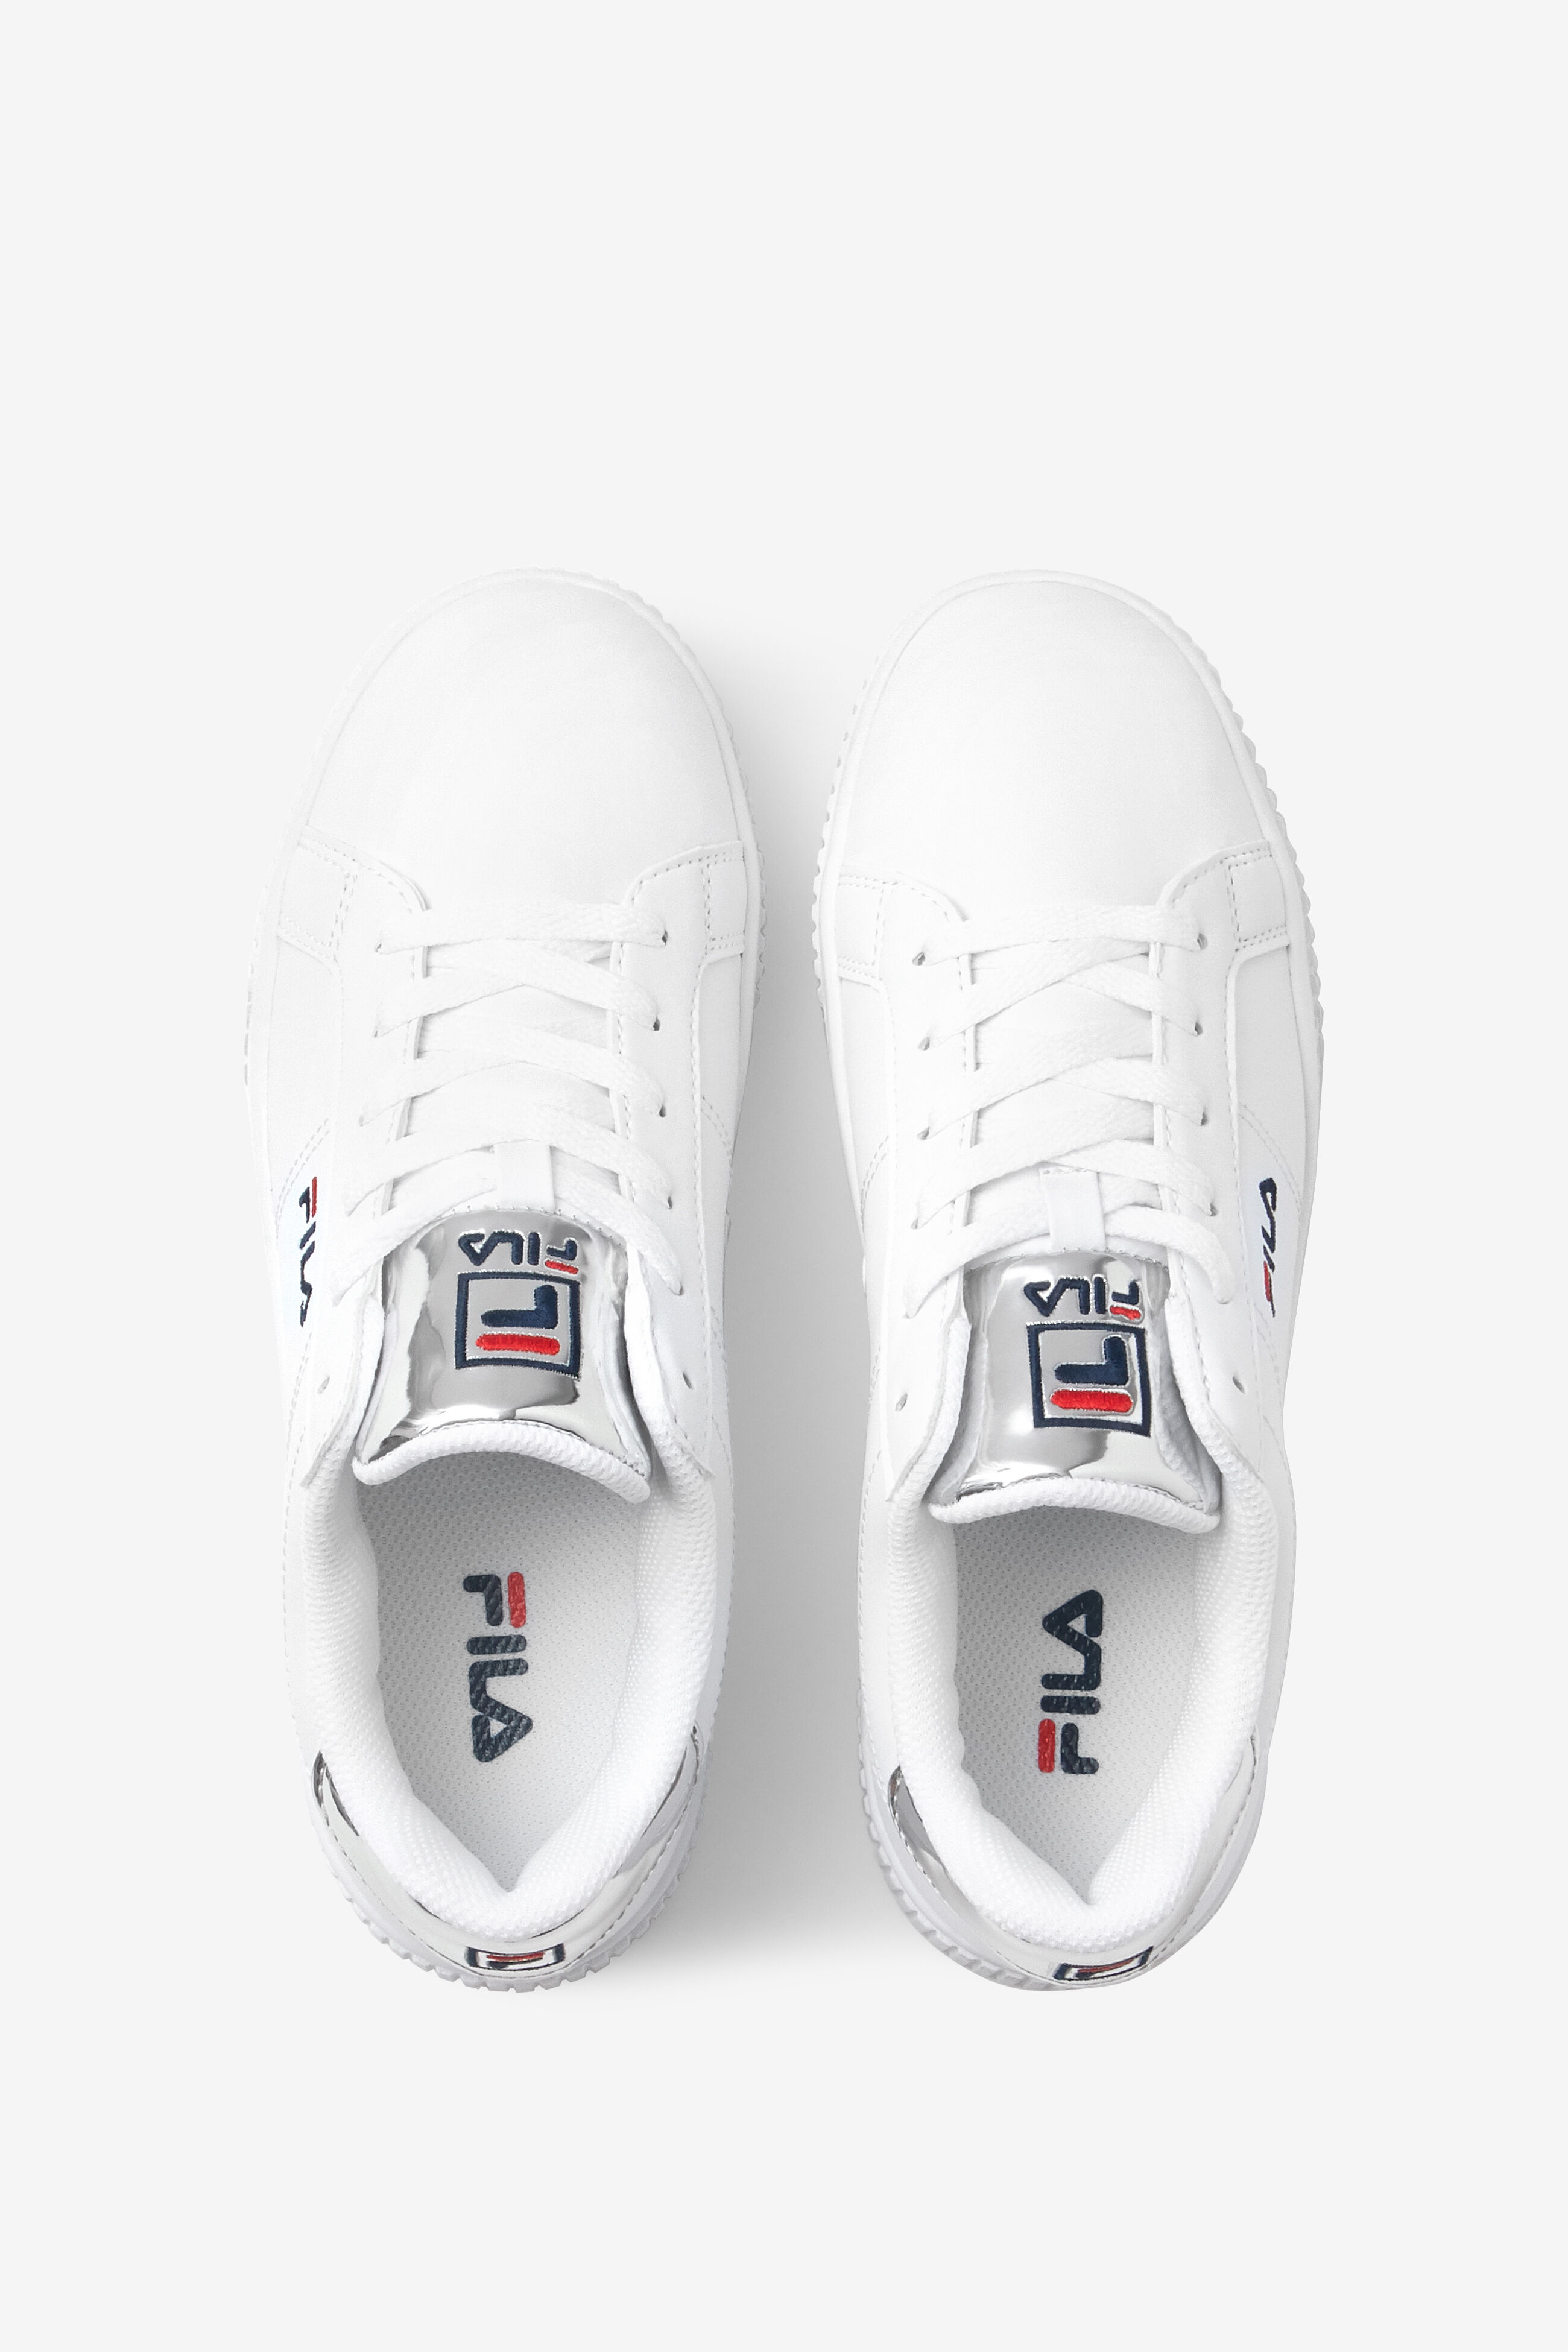 Latest Fila Sneakers & Casual shoes arrivals - Men - 3 products | FASHIOLA  INDIA